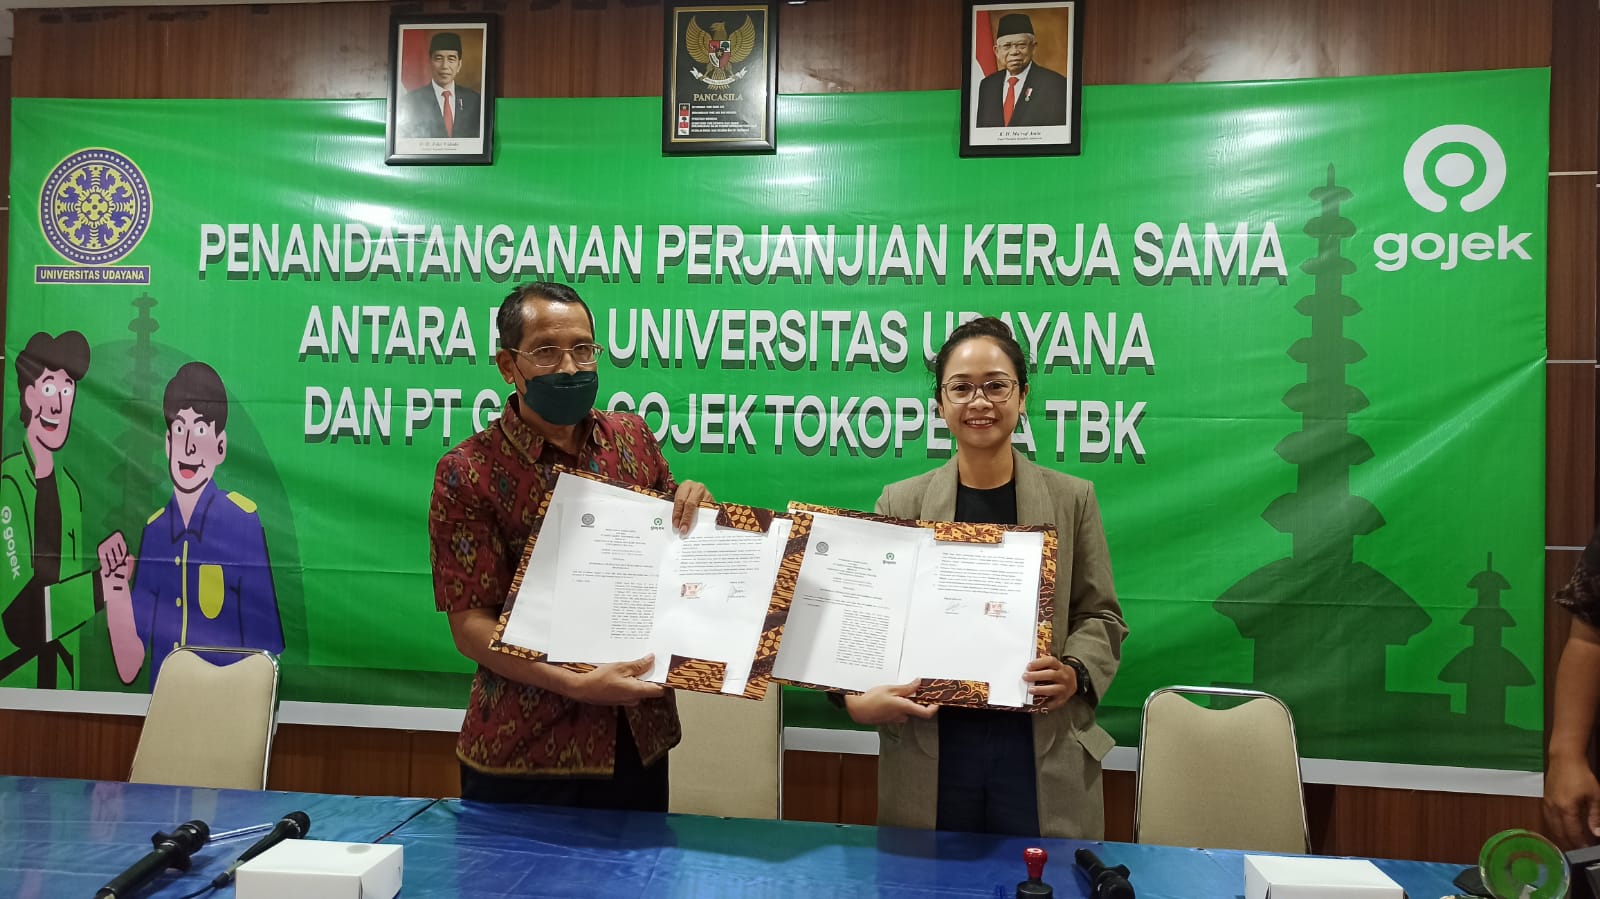 Expanding Cooperation Network, FISIP Udayana Carrying Out the Signing of PKS with PT. GOTO Gojek Tokopedia Tbk.